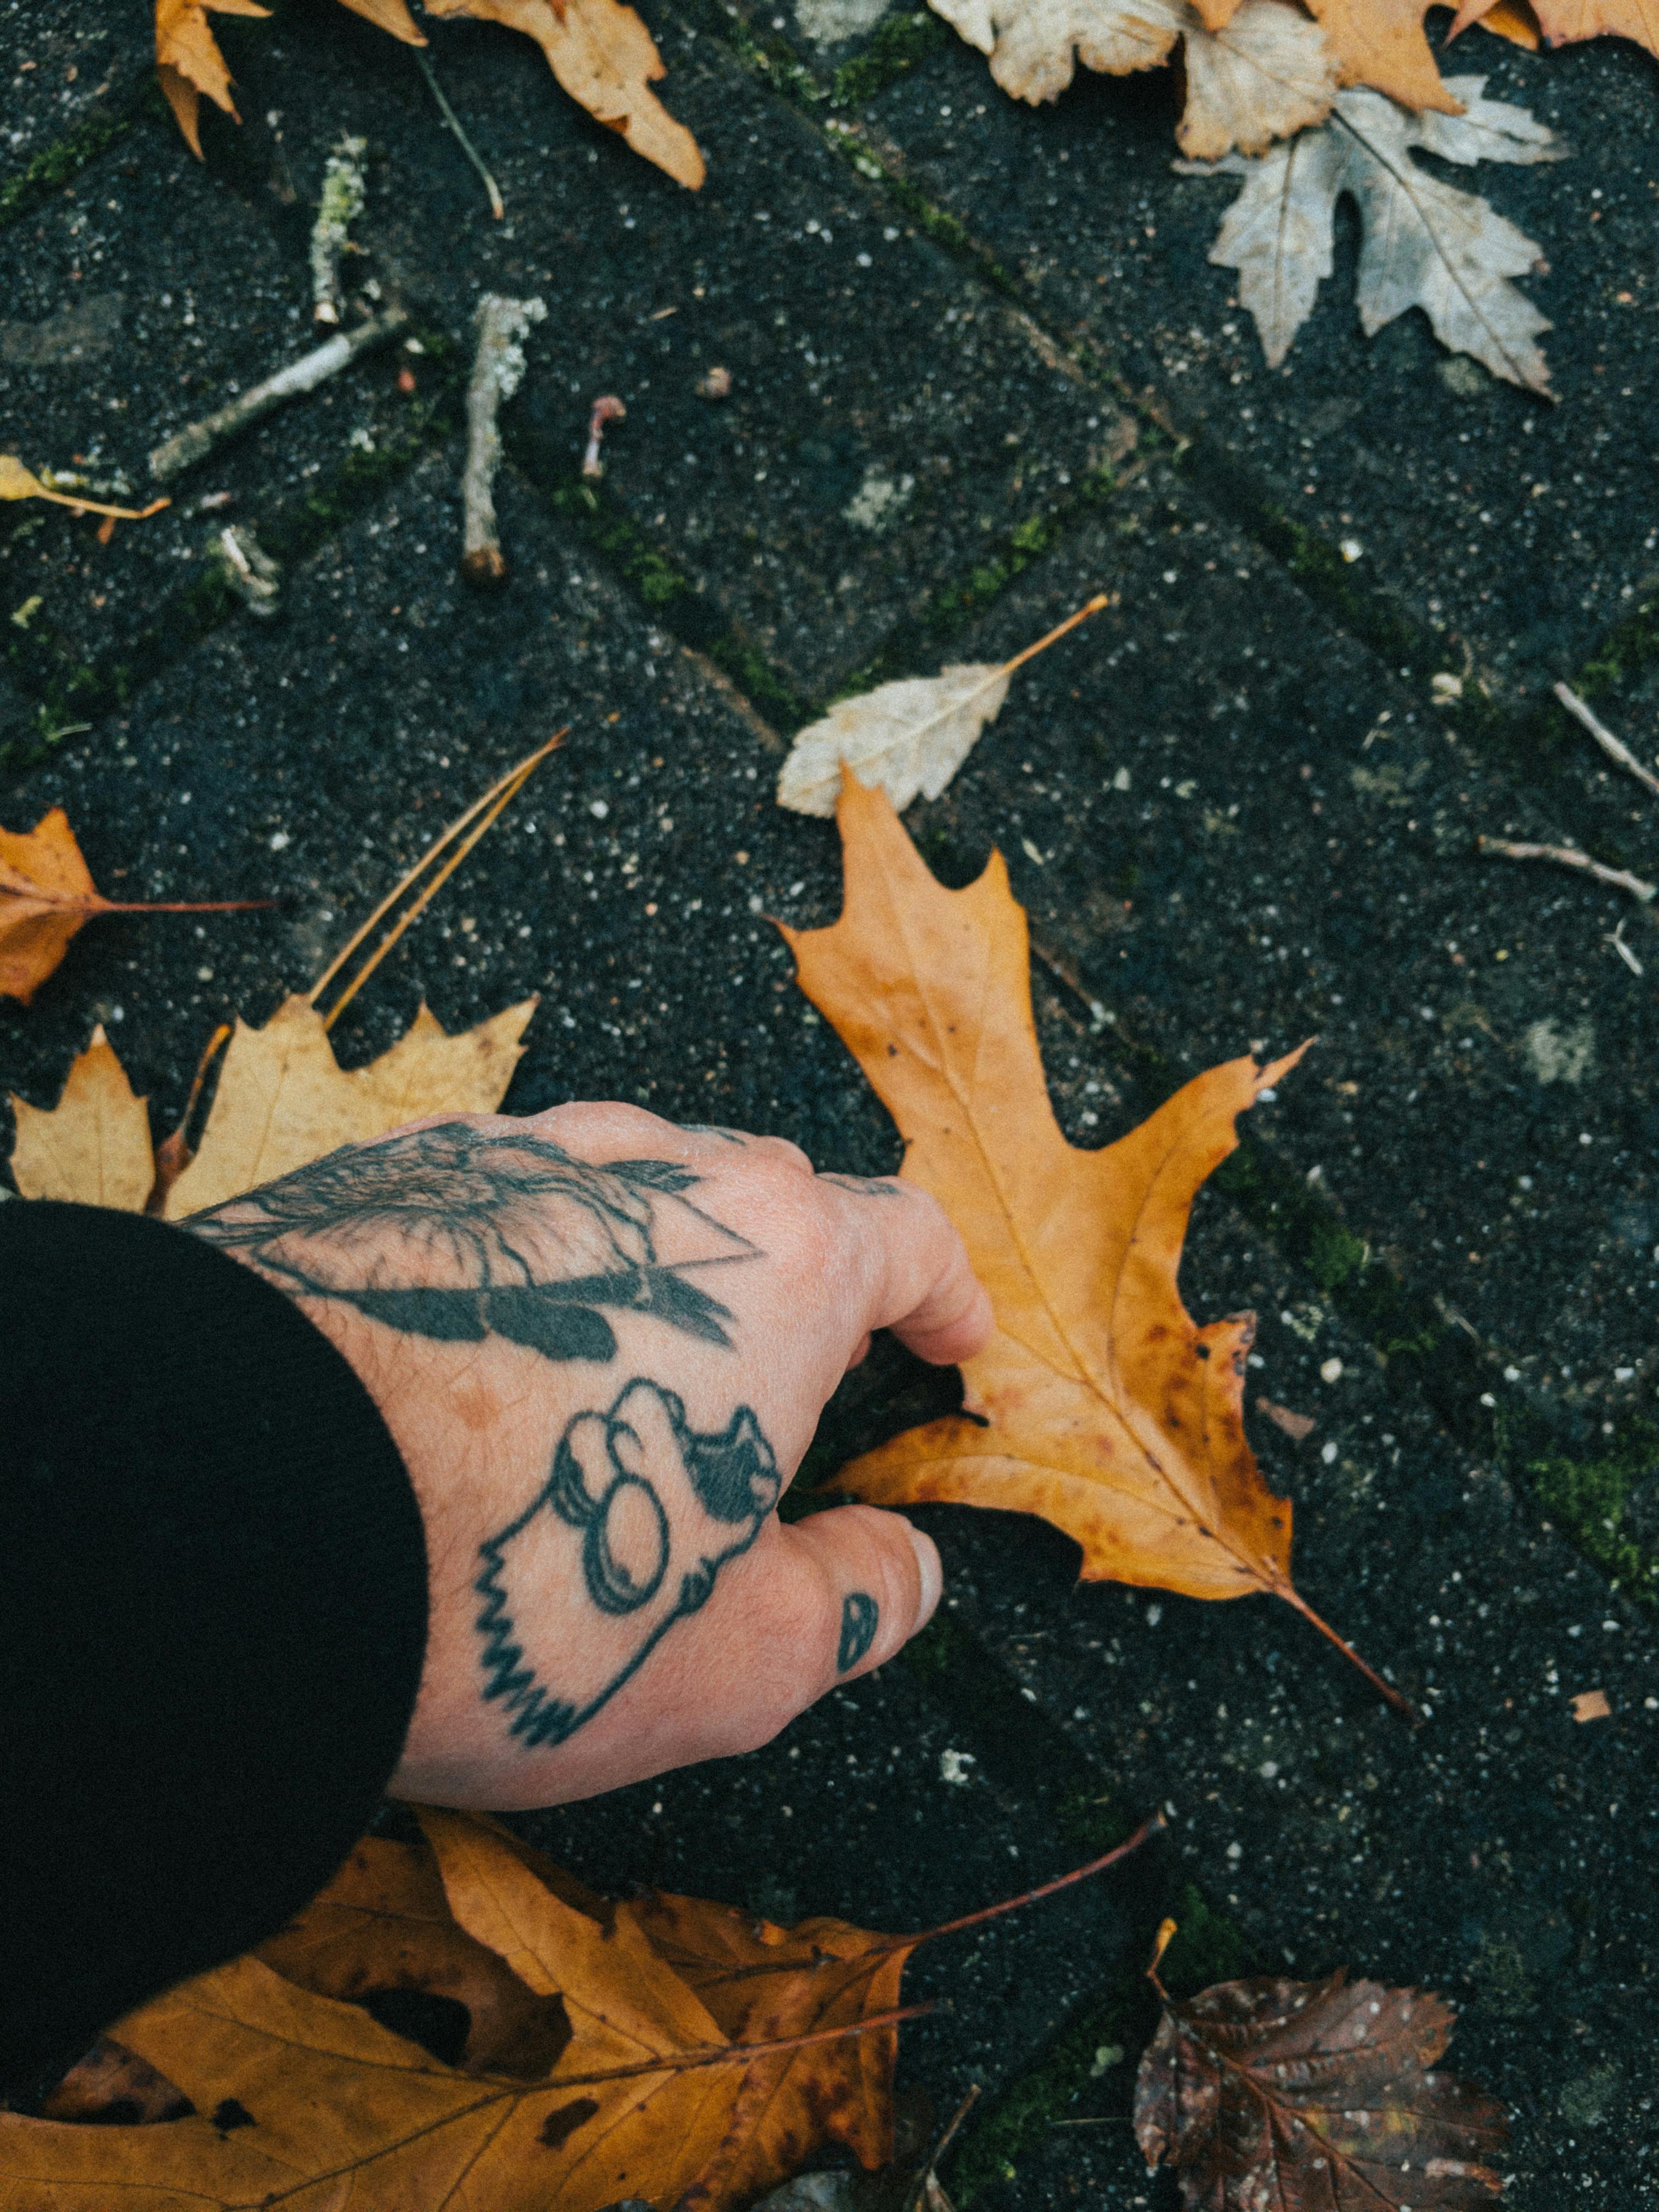 13 Mental Health Tattoo Ideas to Inspire Your Next Ink